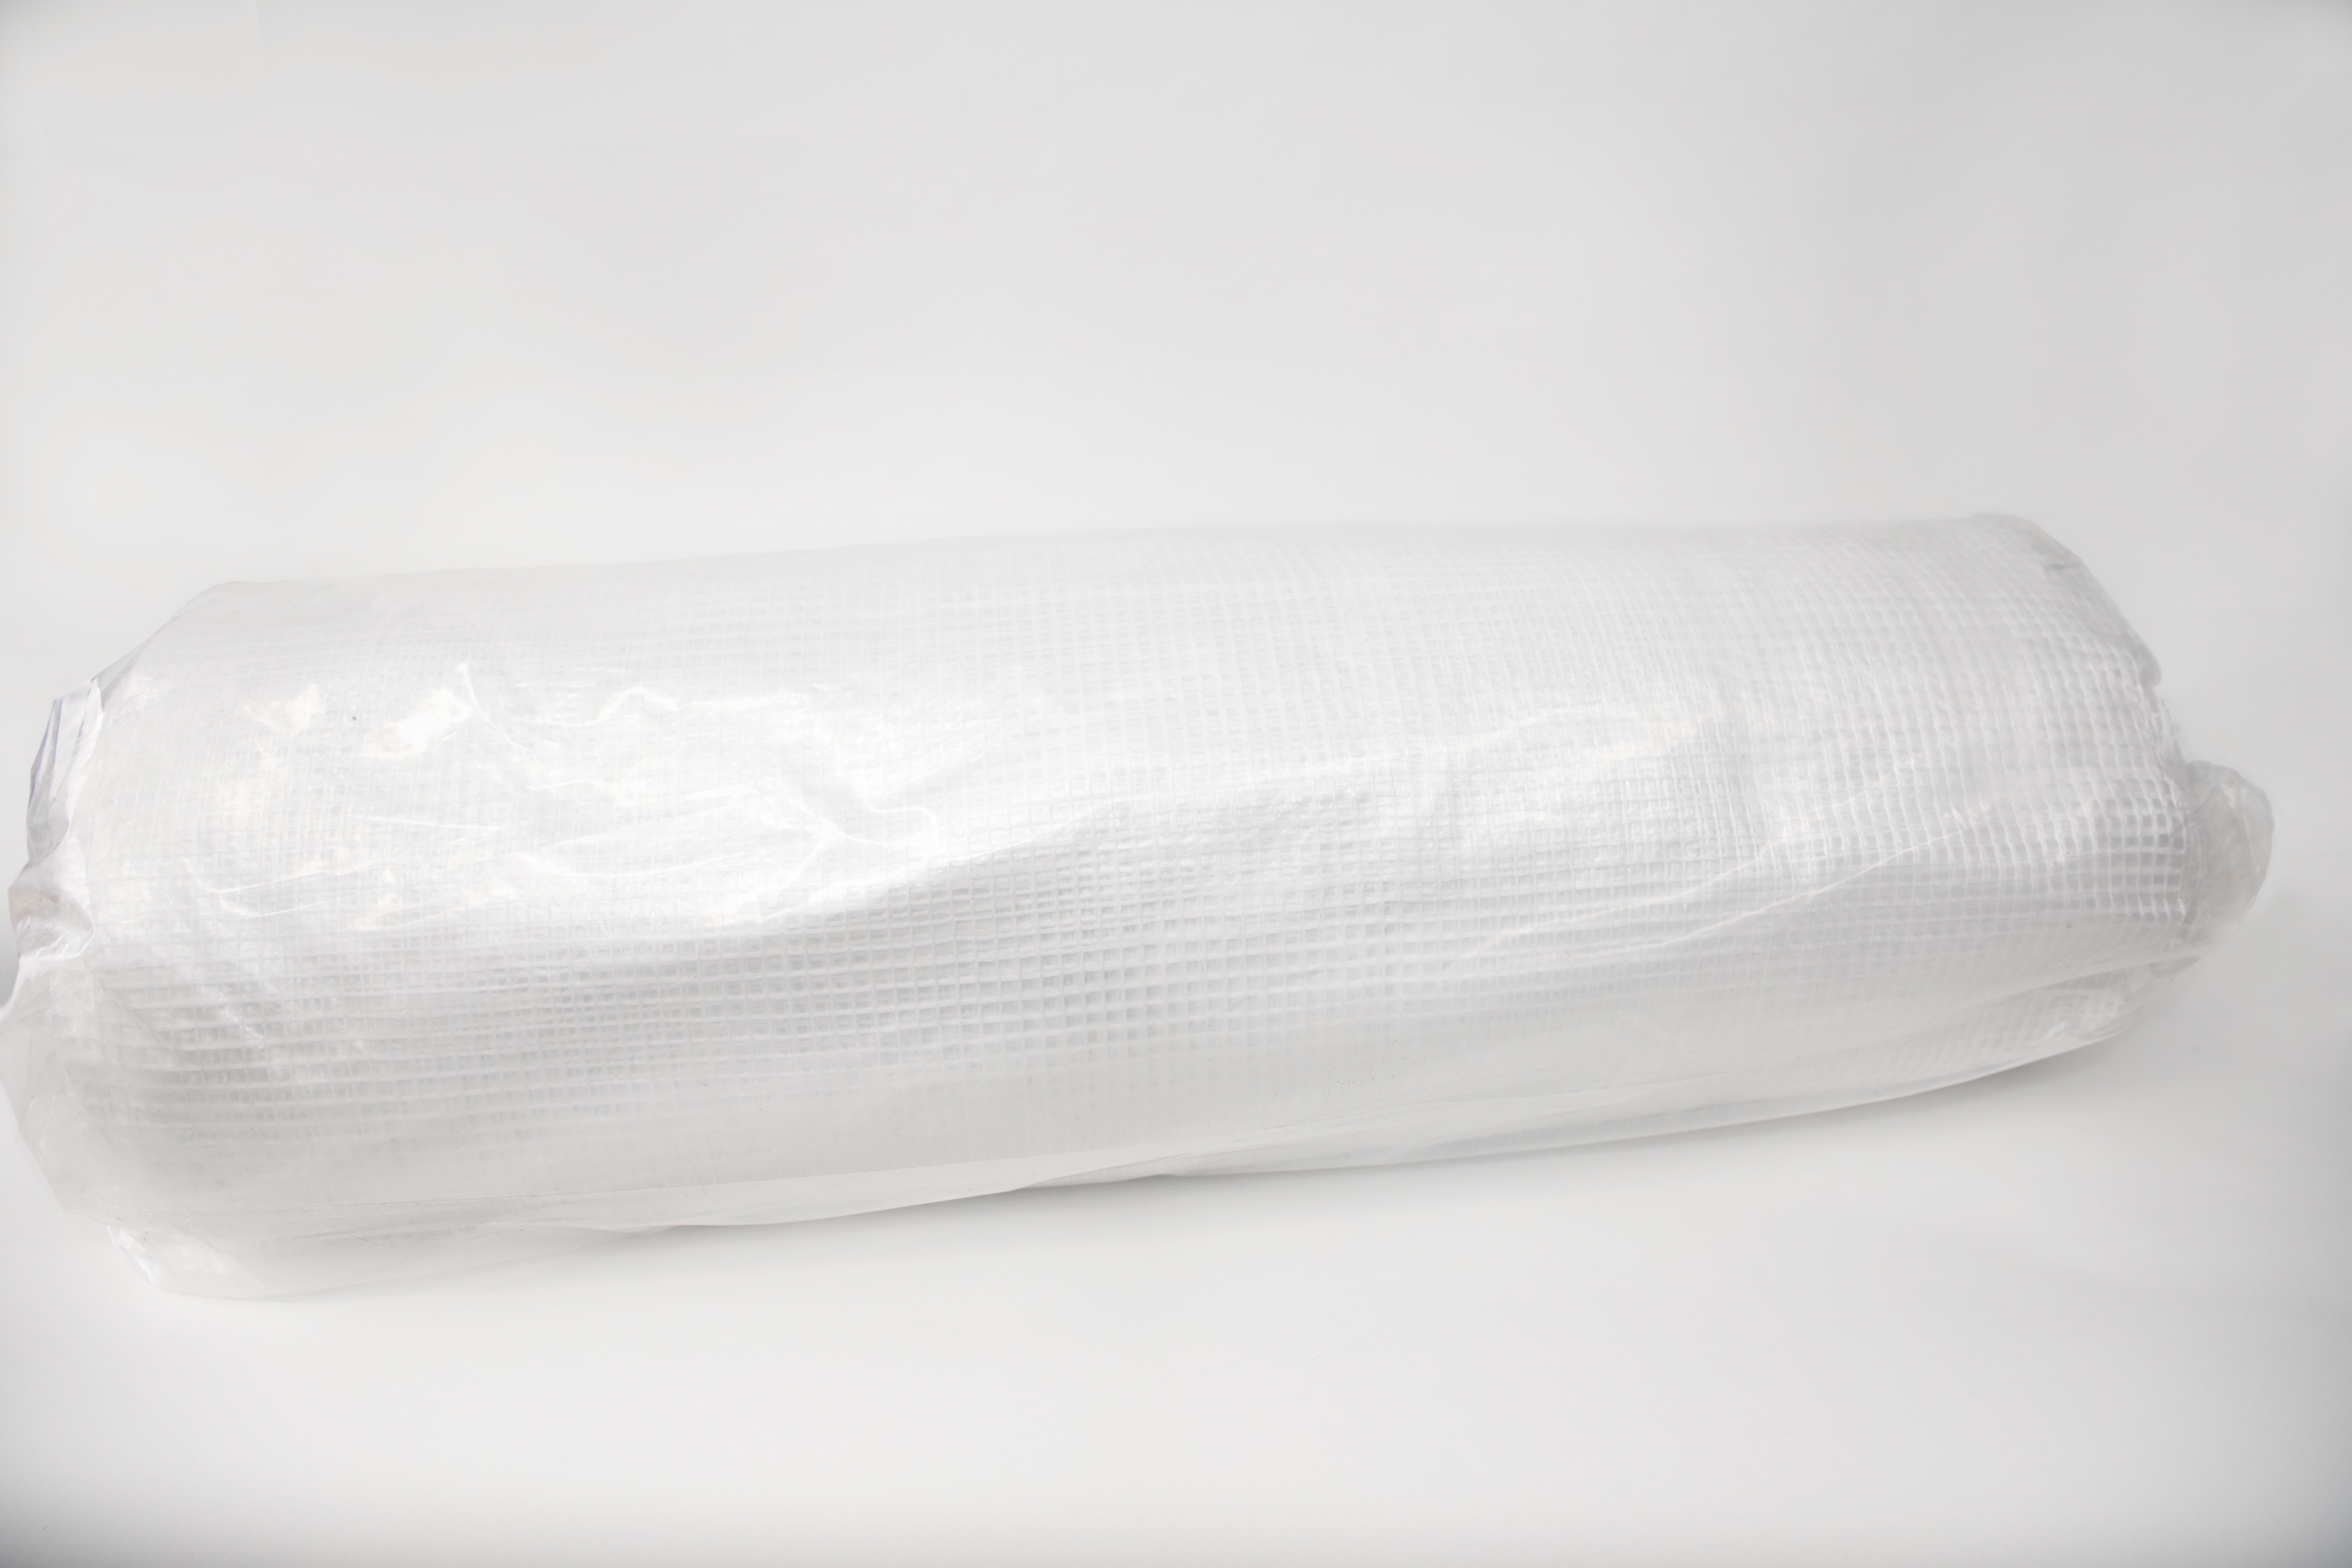 https://www.discountvisqueen.com/catalog/images/Square-Woven-Reinforced-Semi-Clear-Poly-Sheeting_1.jpg